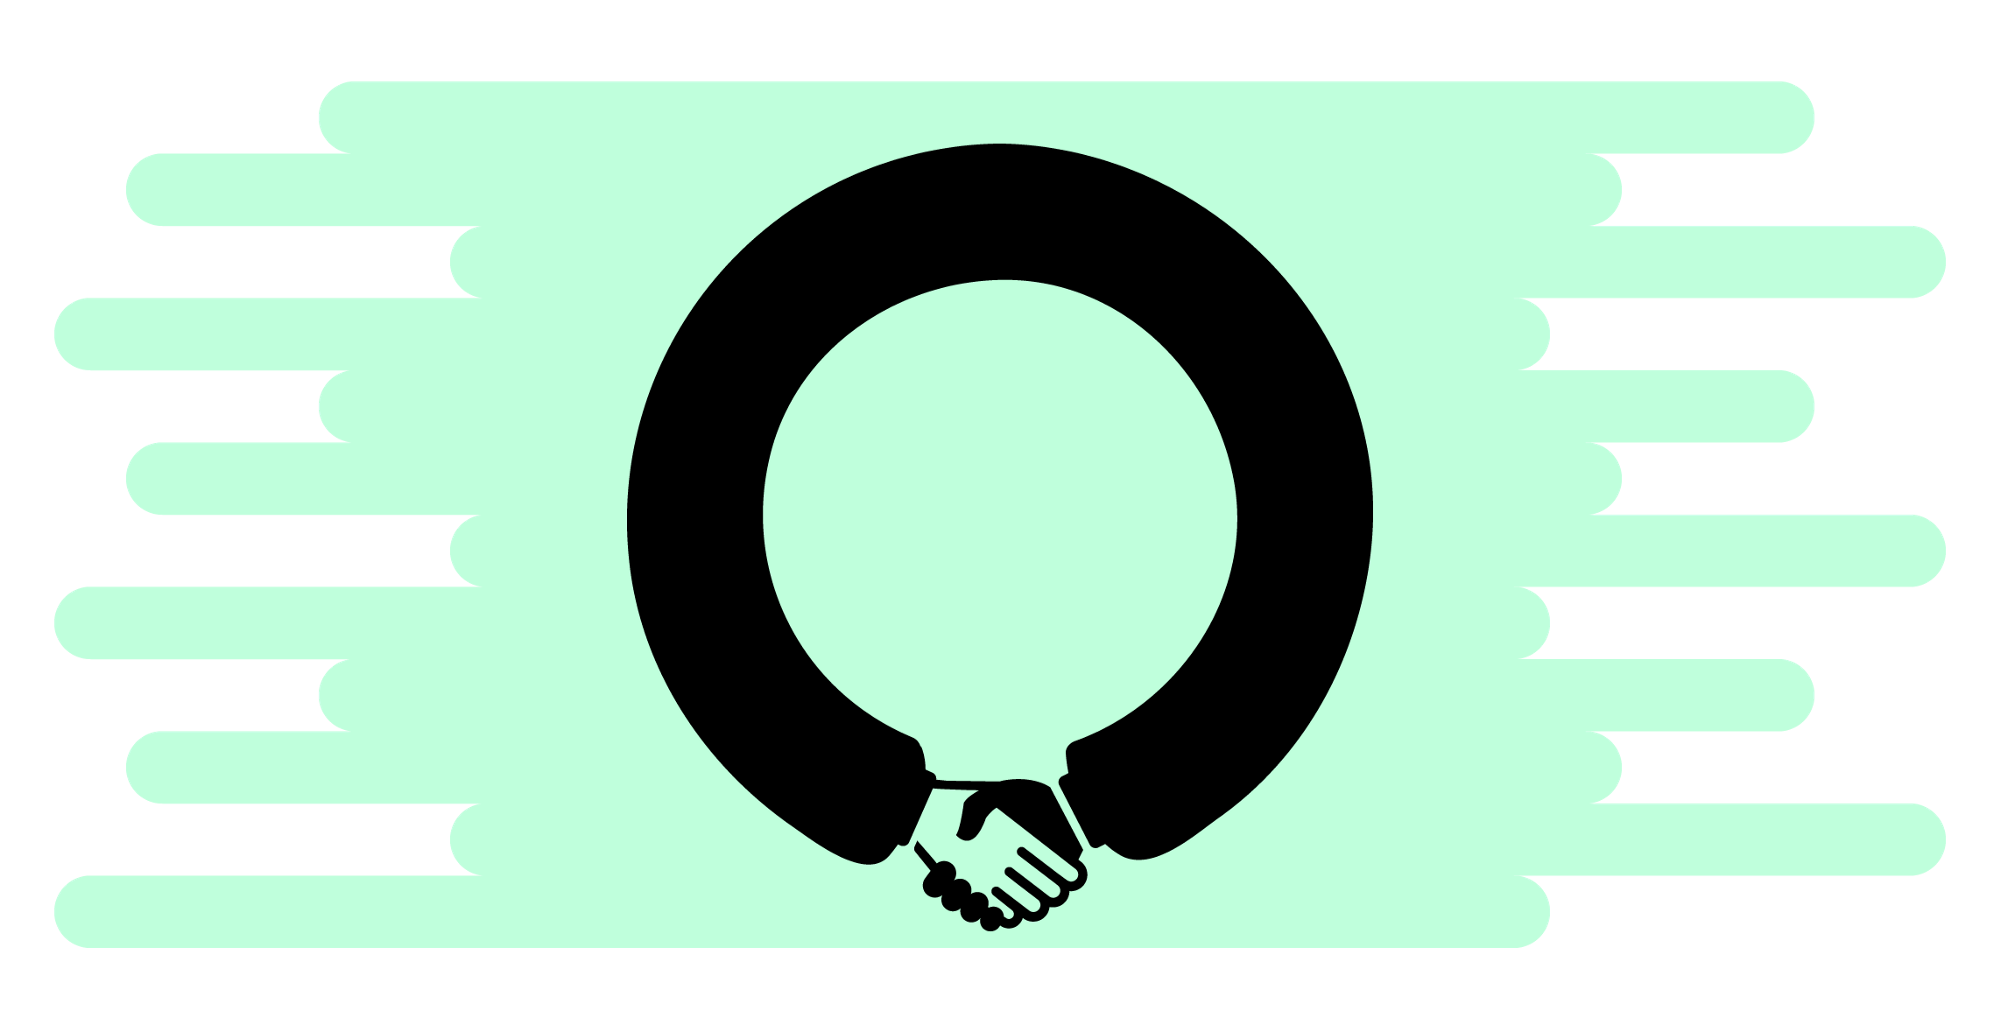 Handshake clipart equality. Depicting race in iconography